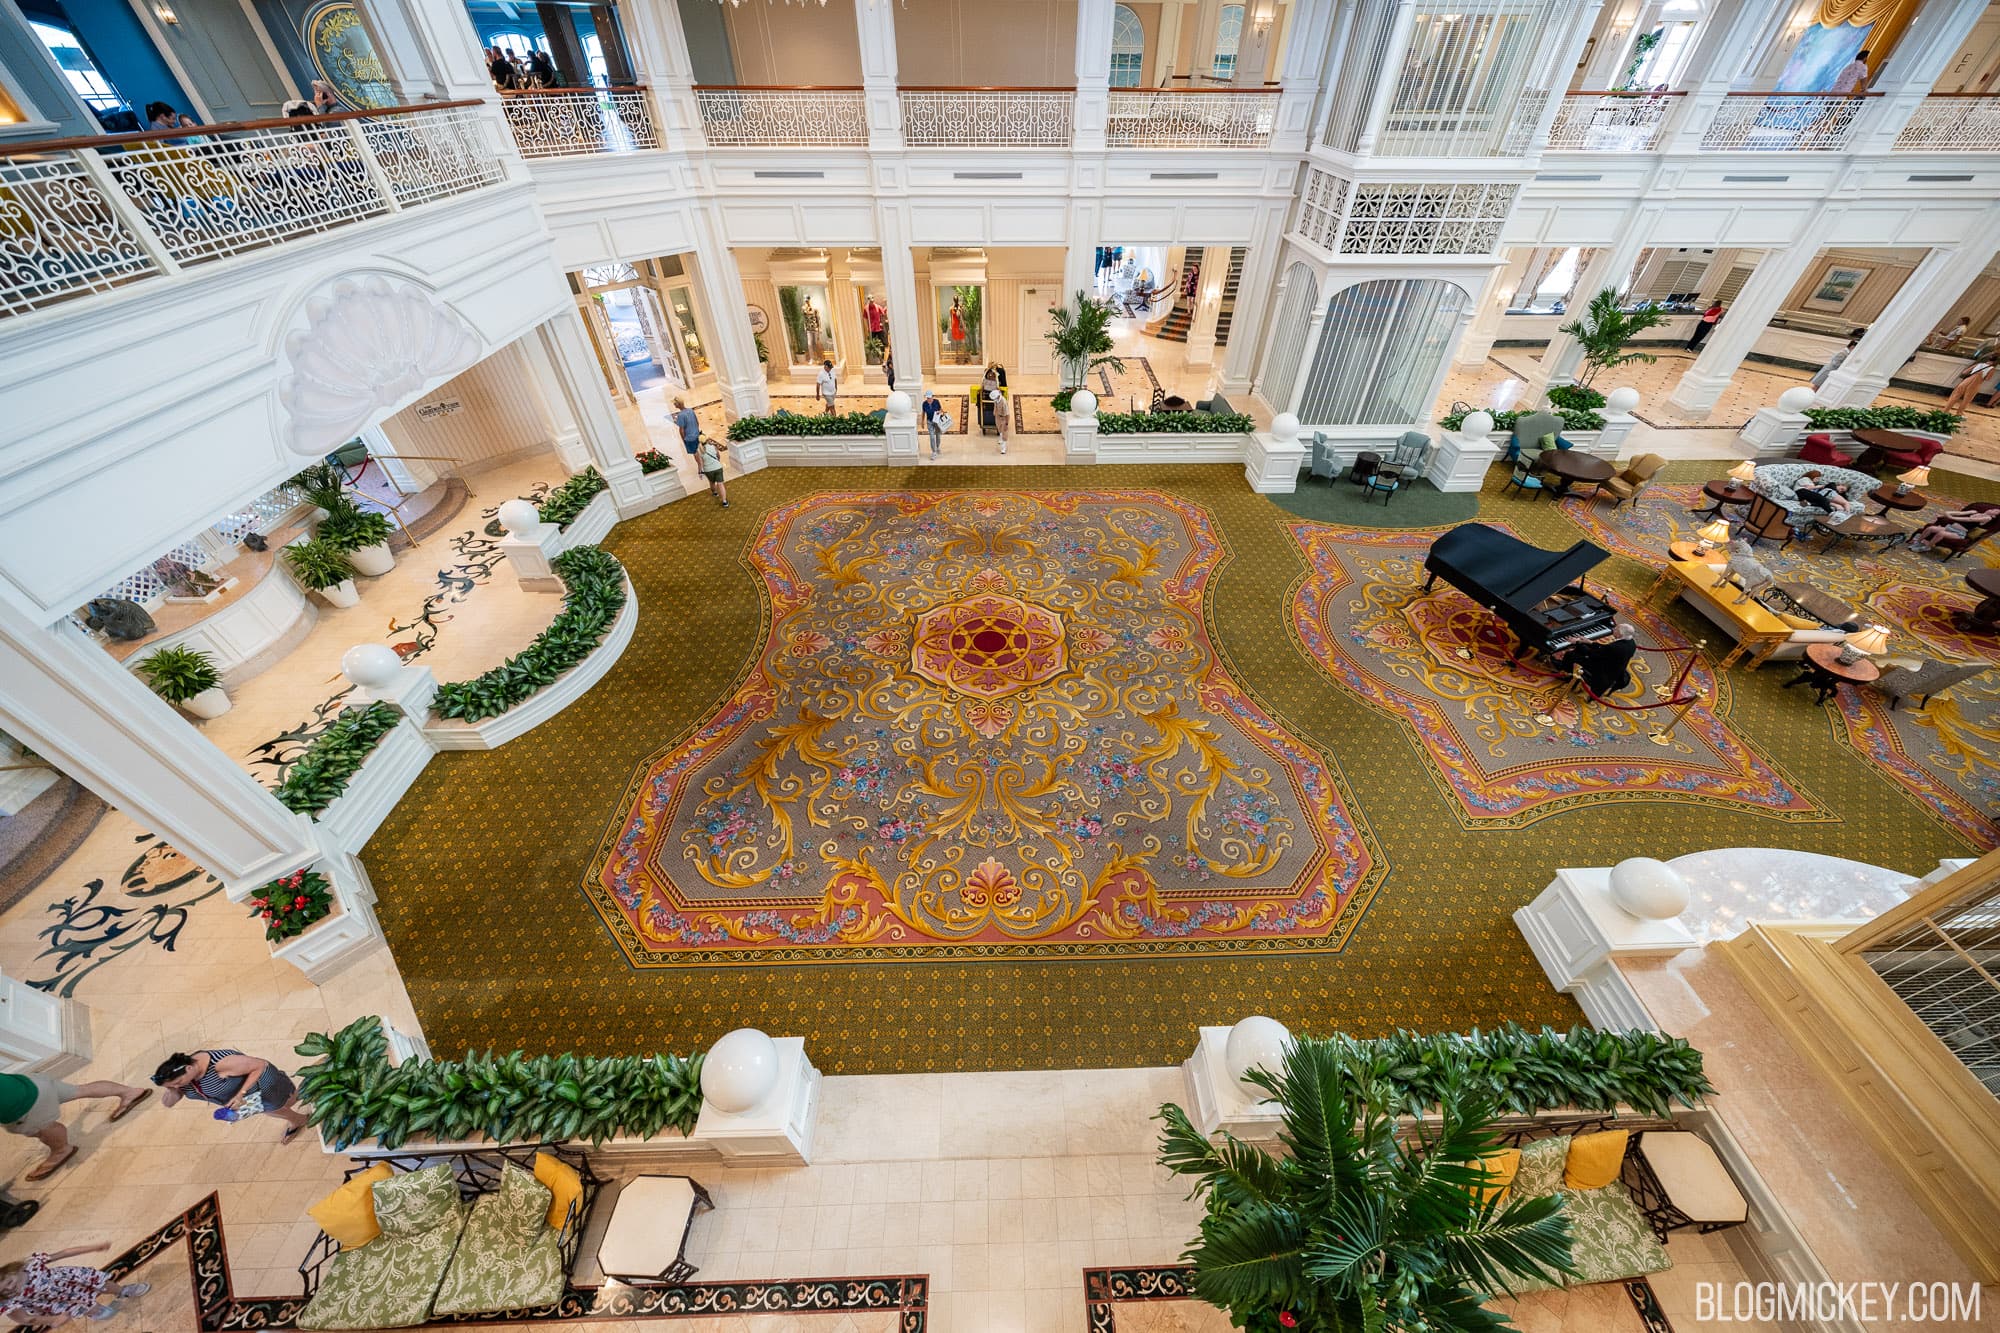 grand-floridian-lobby-partially-cleared-gingerbread-installation-10292023-2.jpg